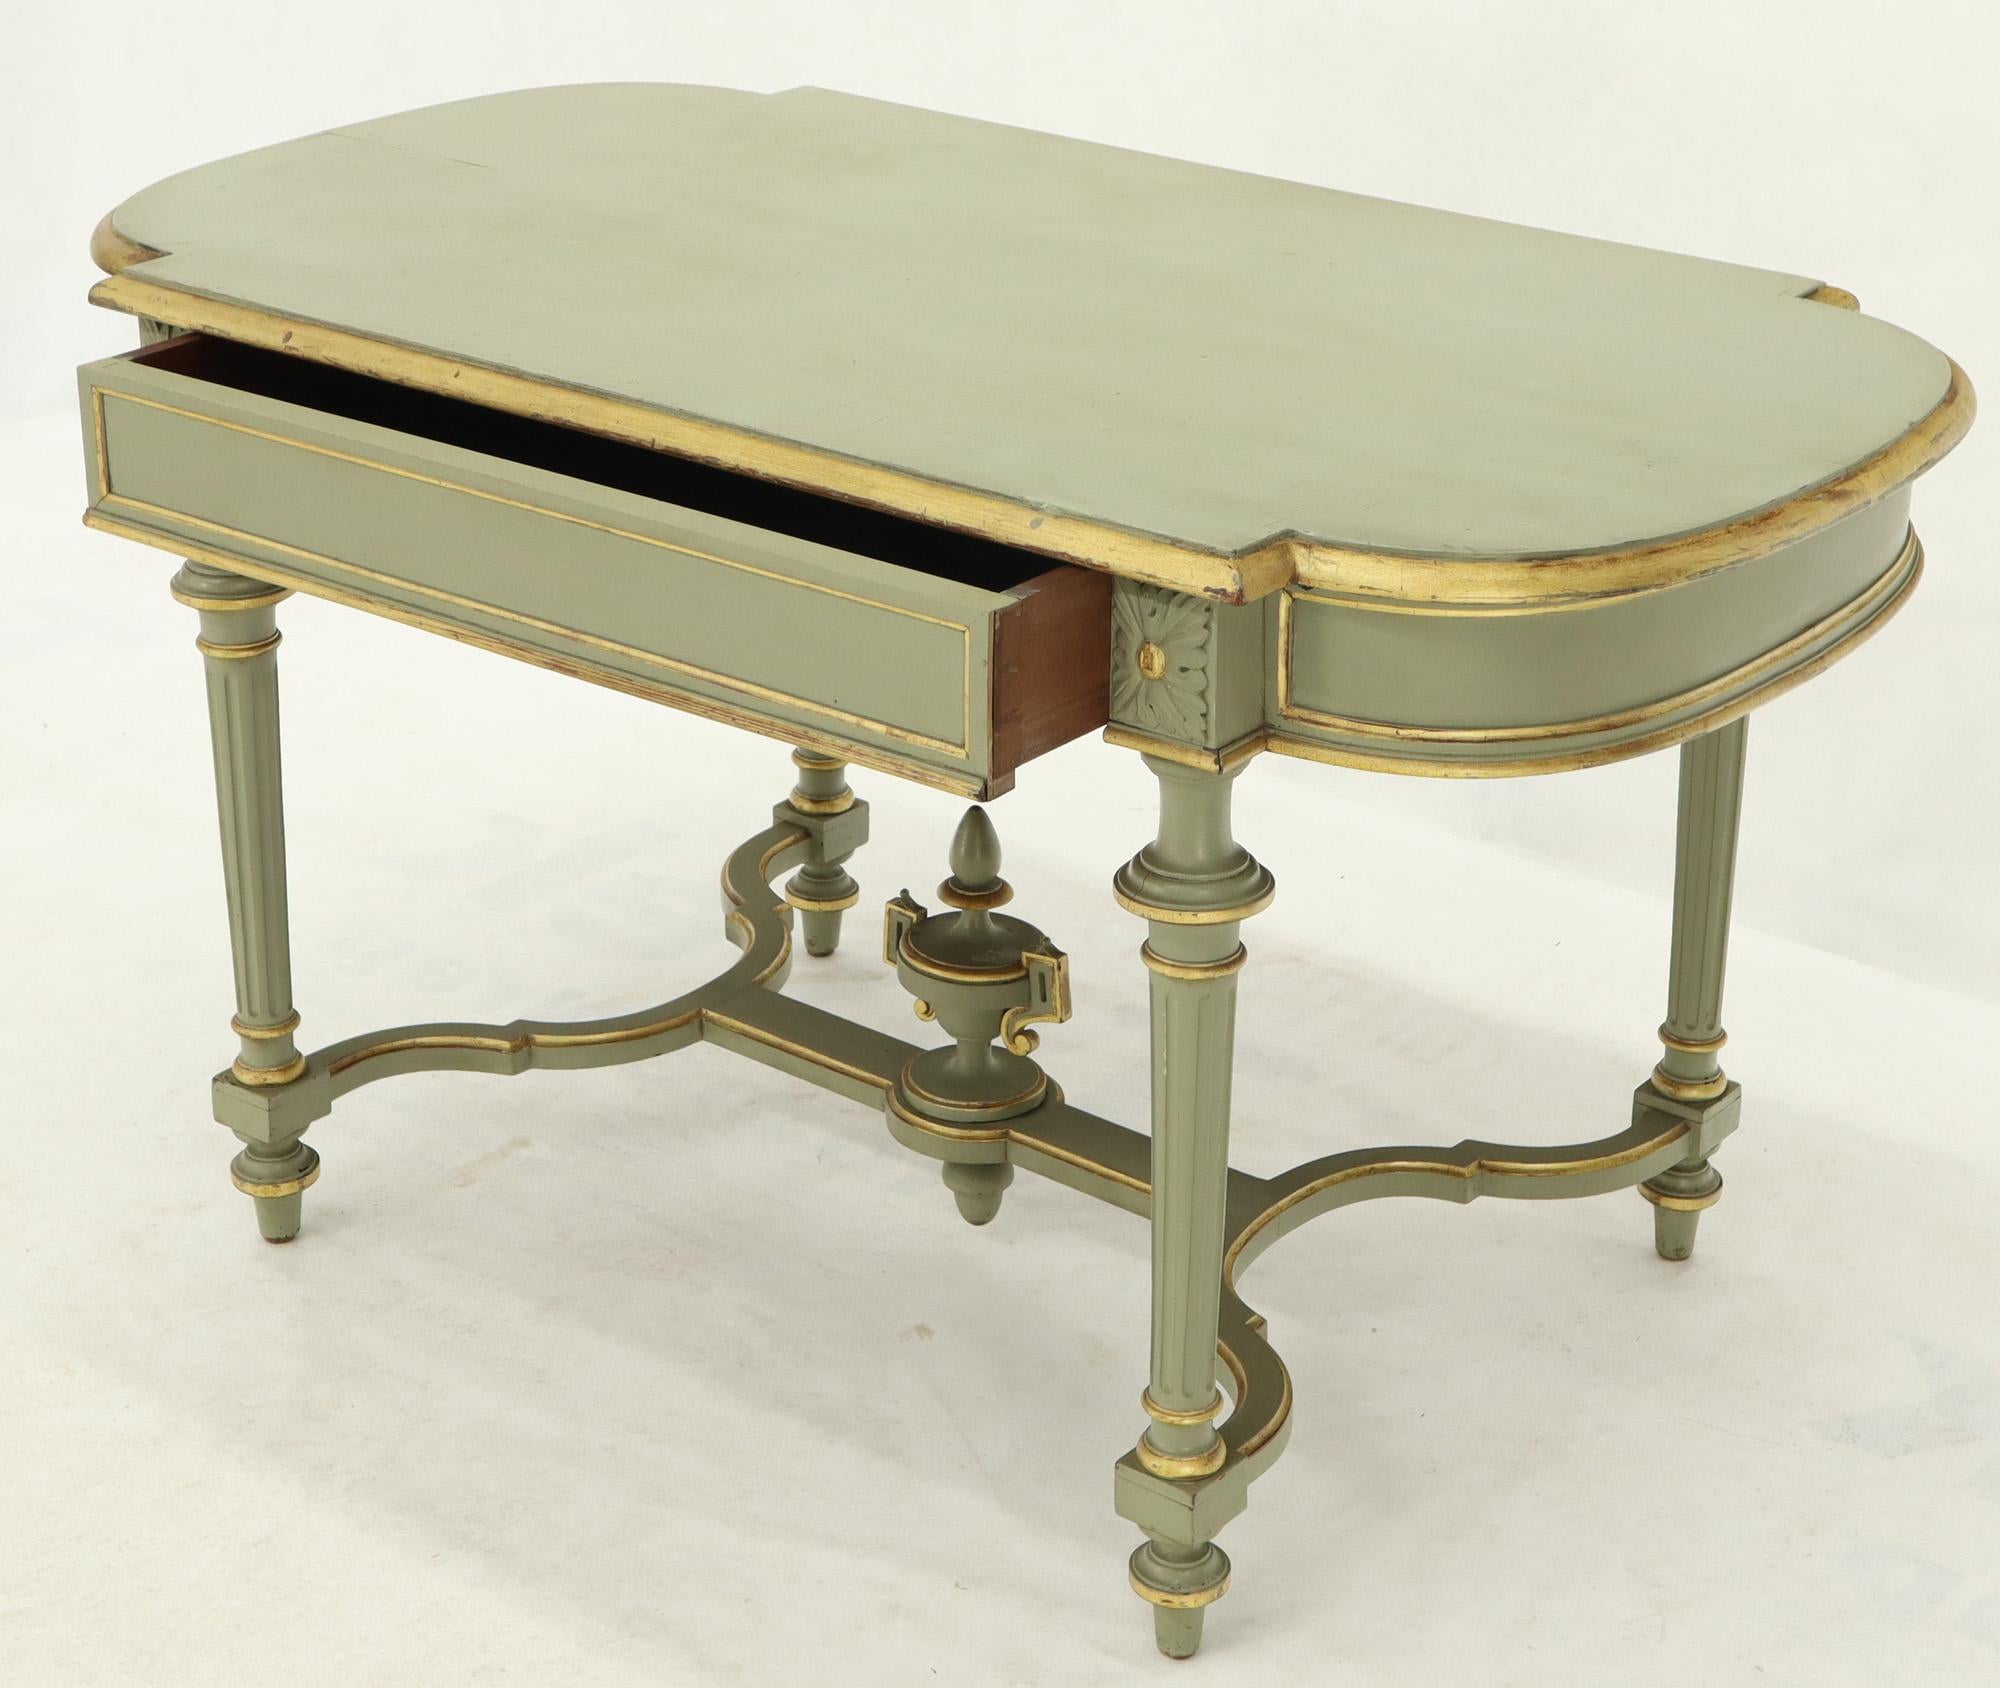 Shabby Chic and Gold Leaf Distressed Antique Table Desk Console Grande Console en vente 7